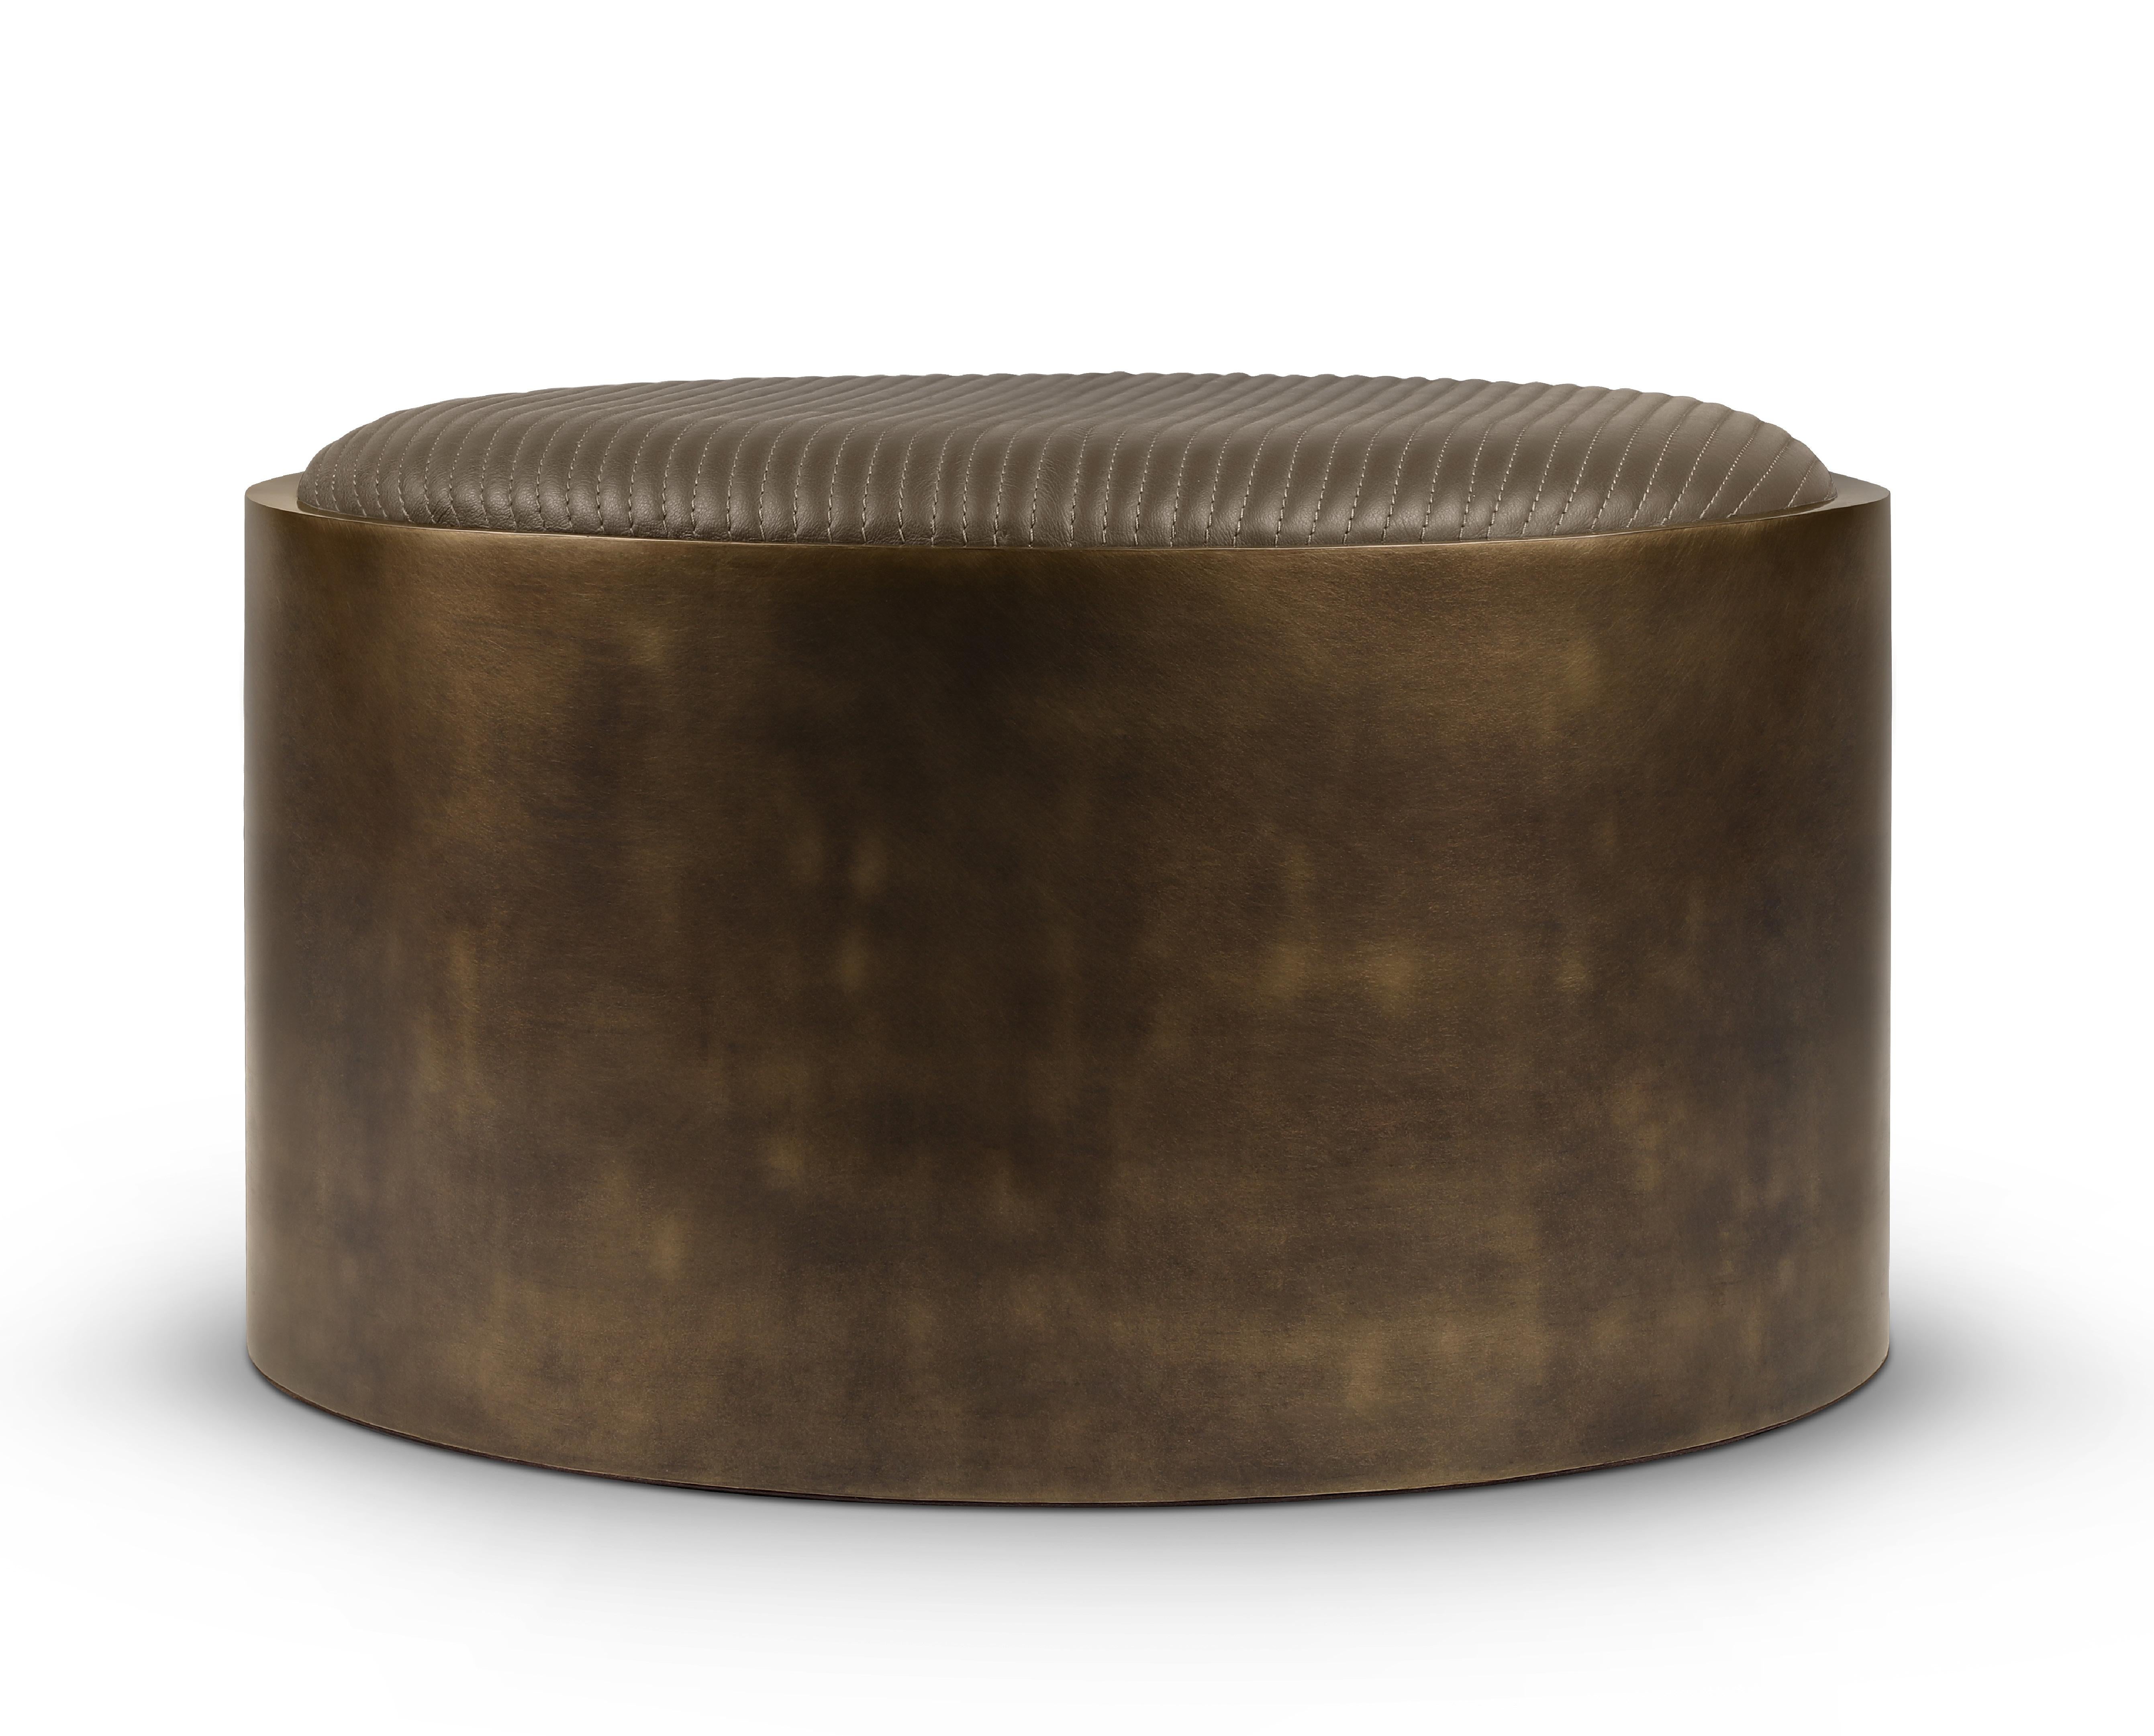 Handstitched Mira Pouf by Madheke.
Dimensions: W 53 x D 53 x H 31.5 cm.
Materials: Leather, metal.

Finished in a deep bronzed olive tone the MIRA’s earthy palette will adapt to most interiors. Detailed with a linear stitch detail and